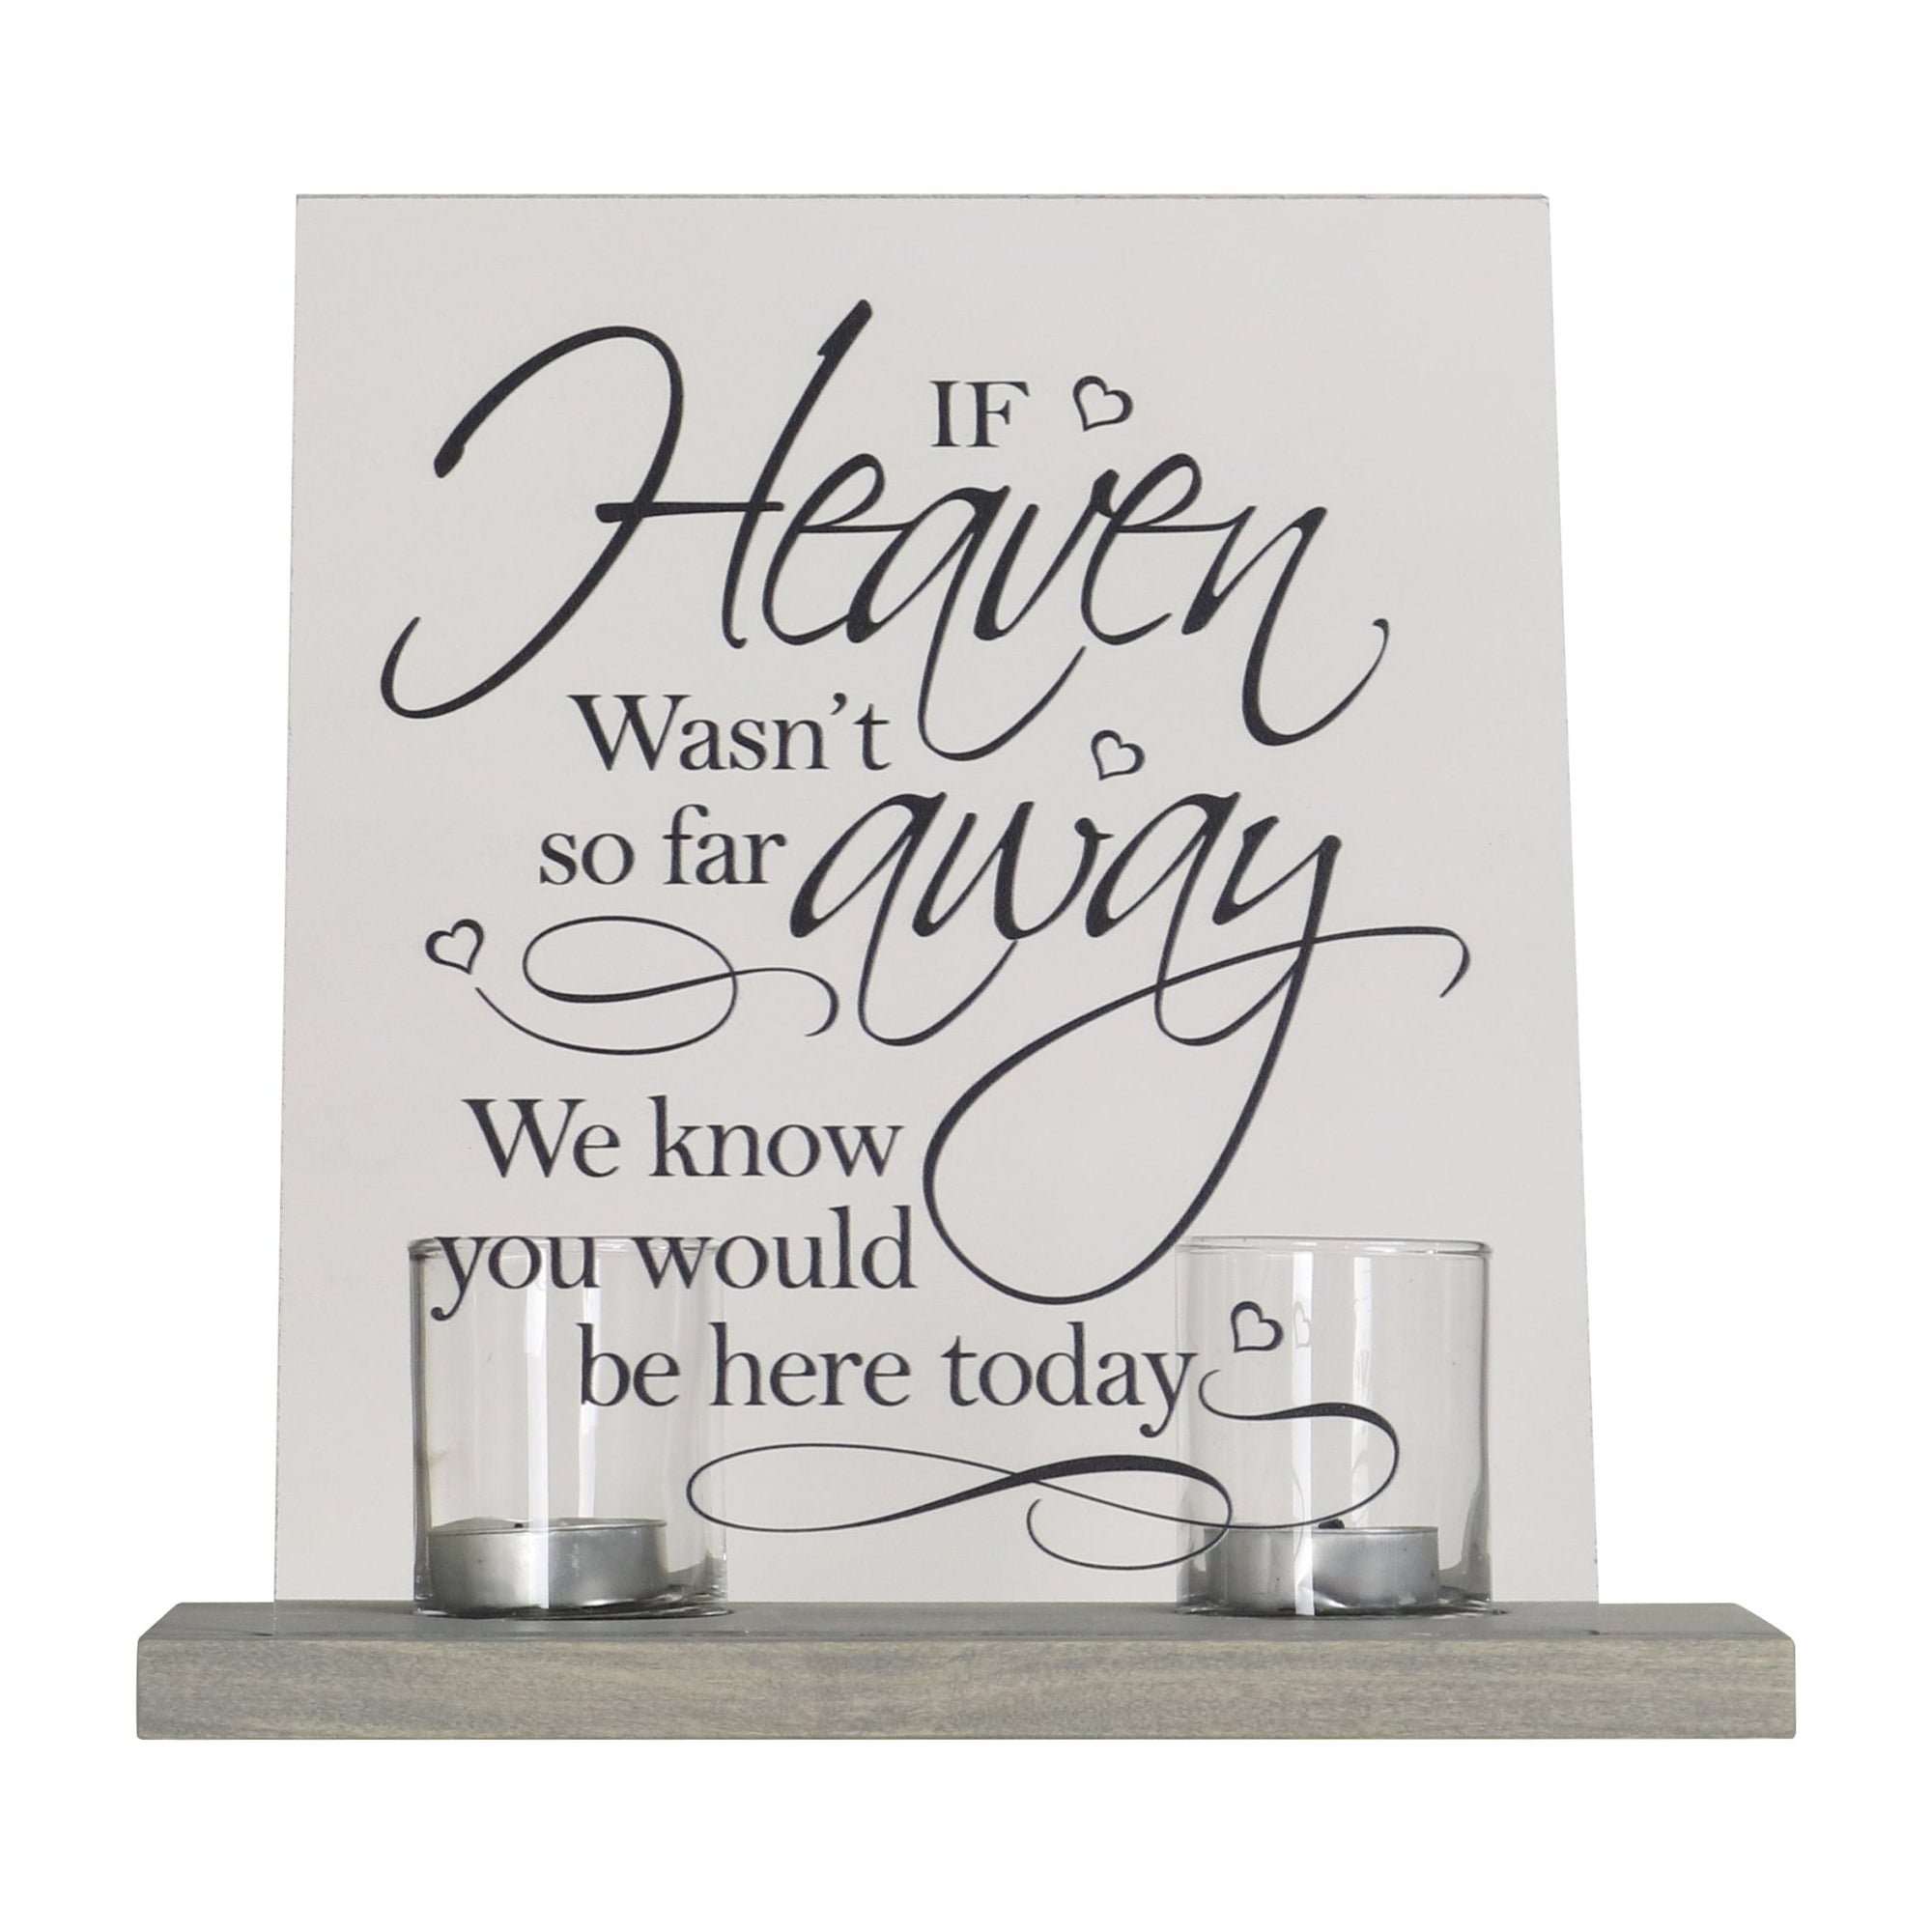 Memorial Acrylic Sign 8x10 with Votive Candle Holder Heaven Wasn't So Far - LifeSong Milestones